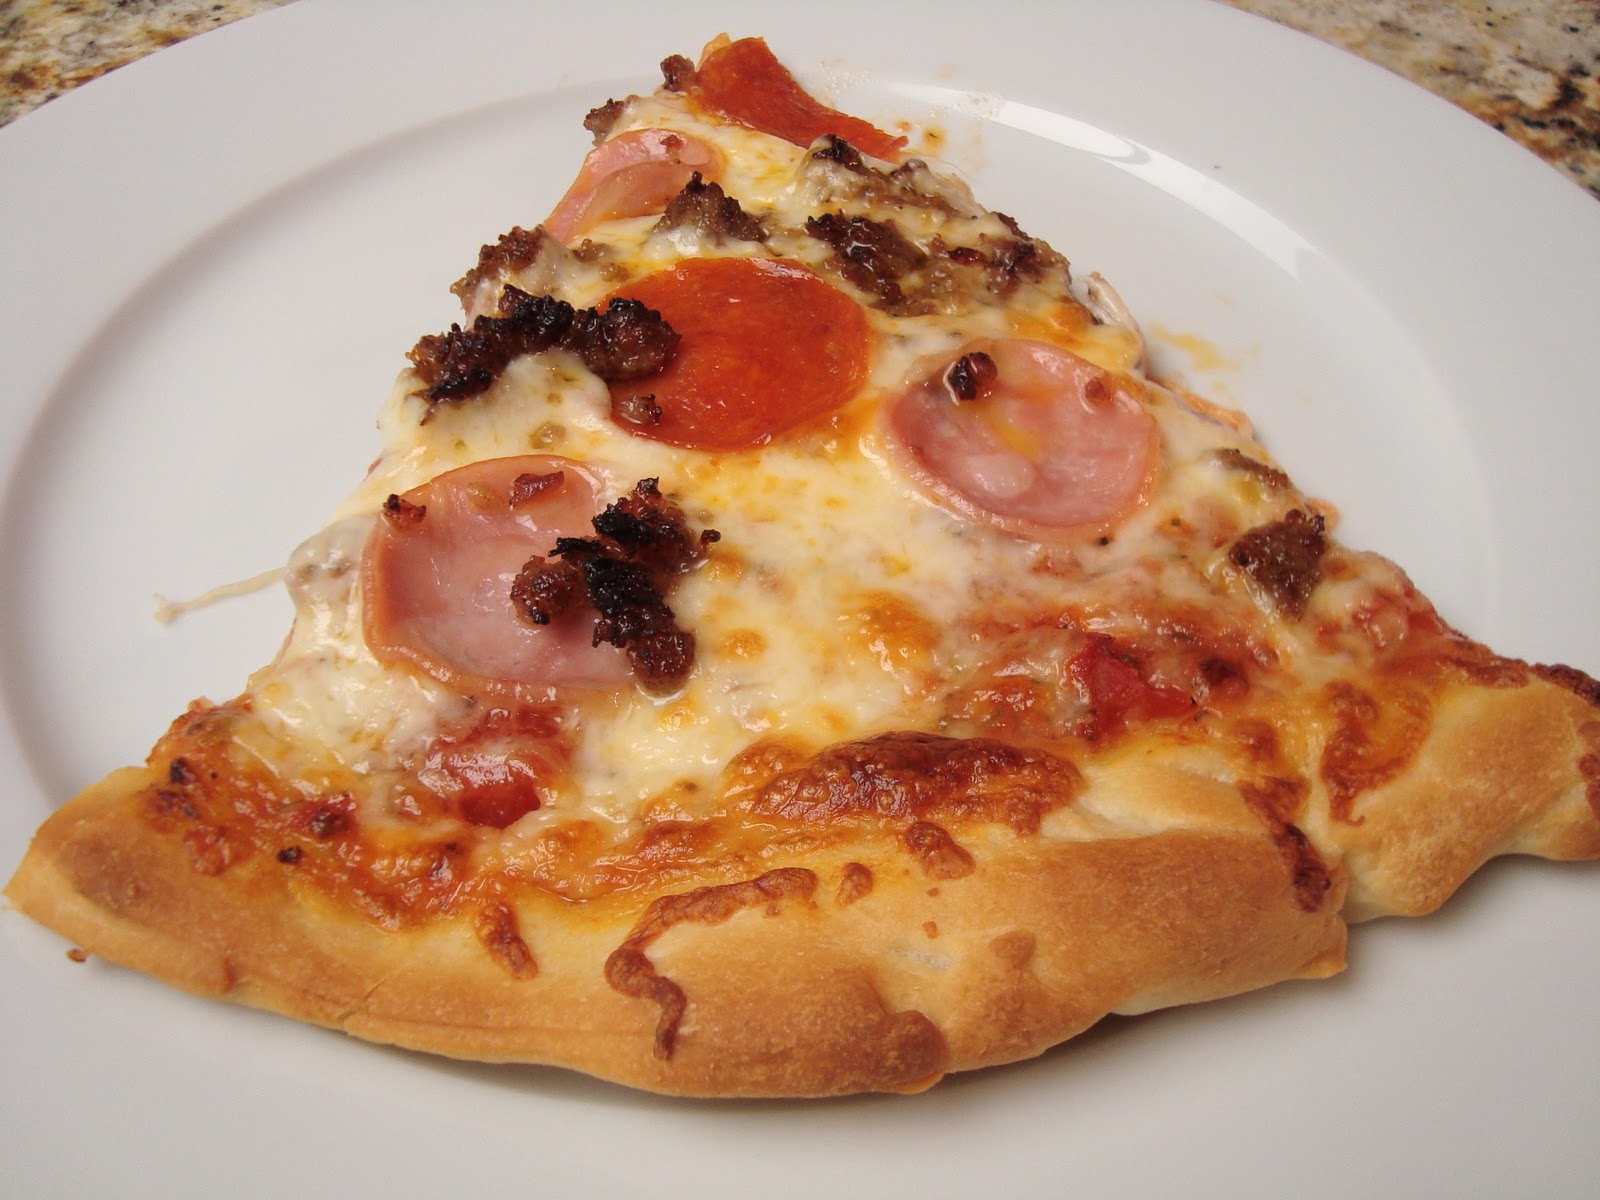 A Little Cooking: New York Pizza Crust